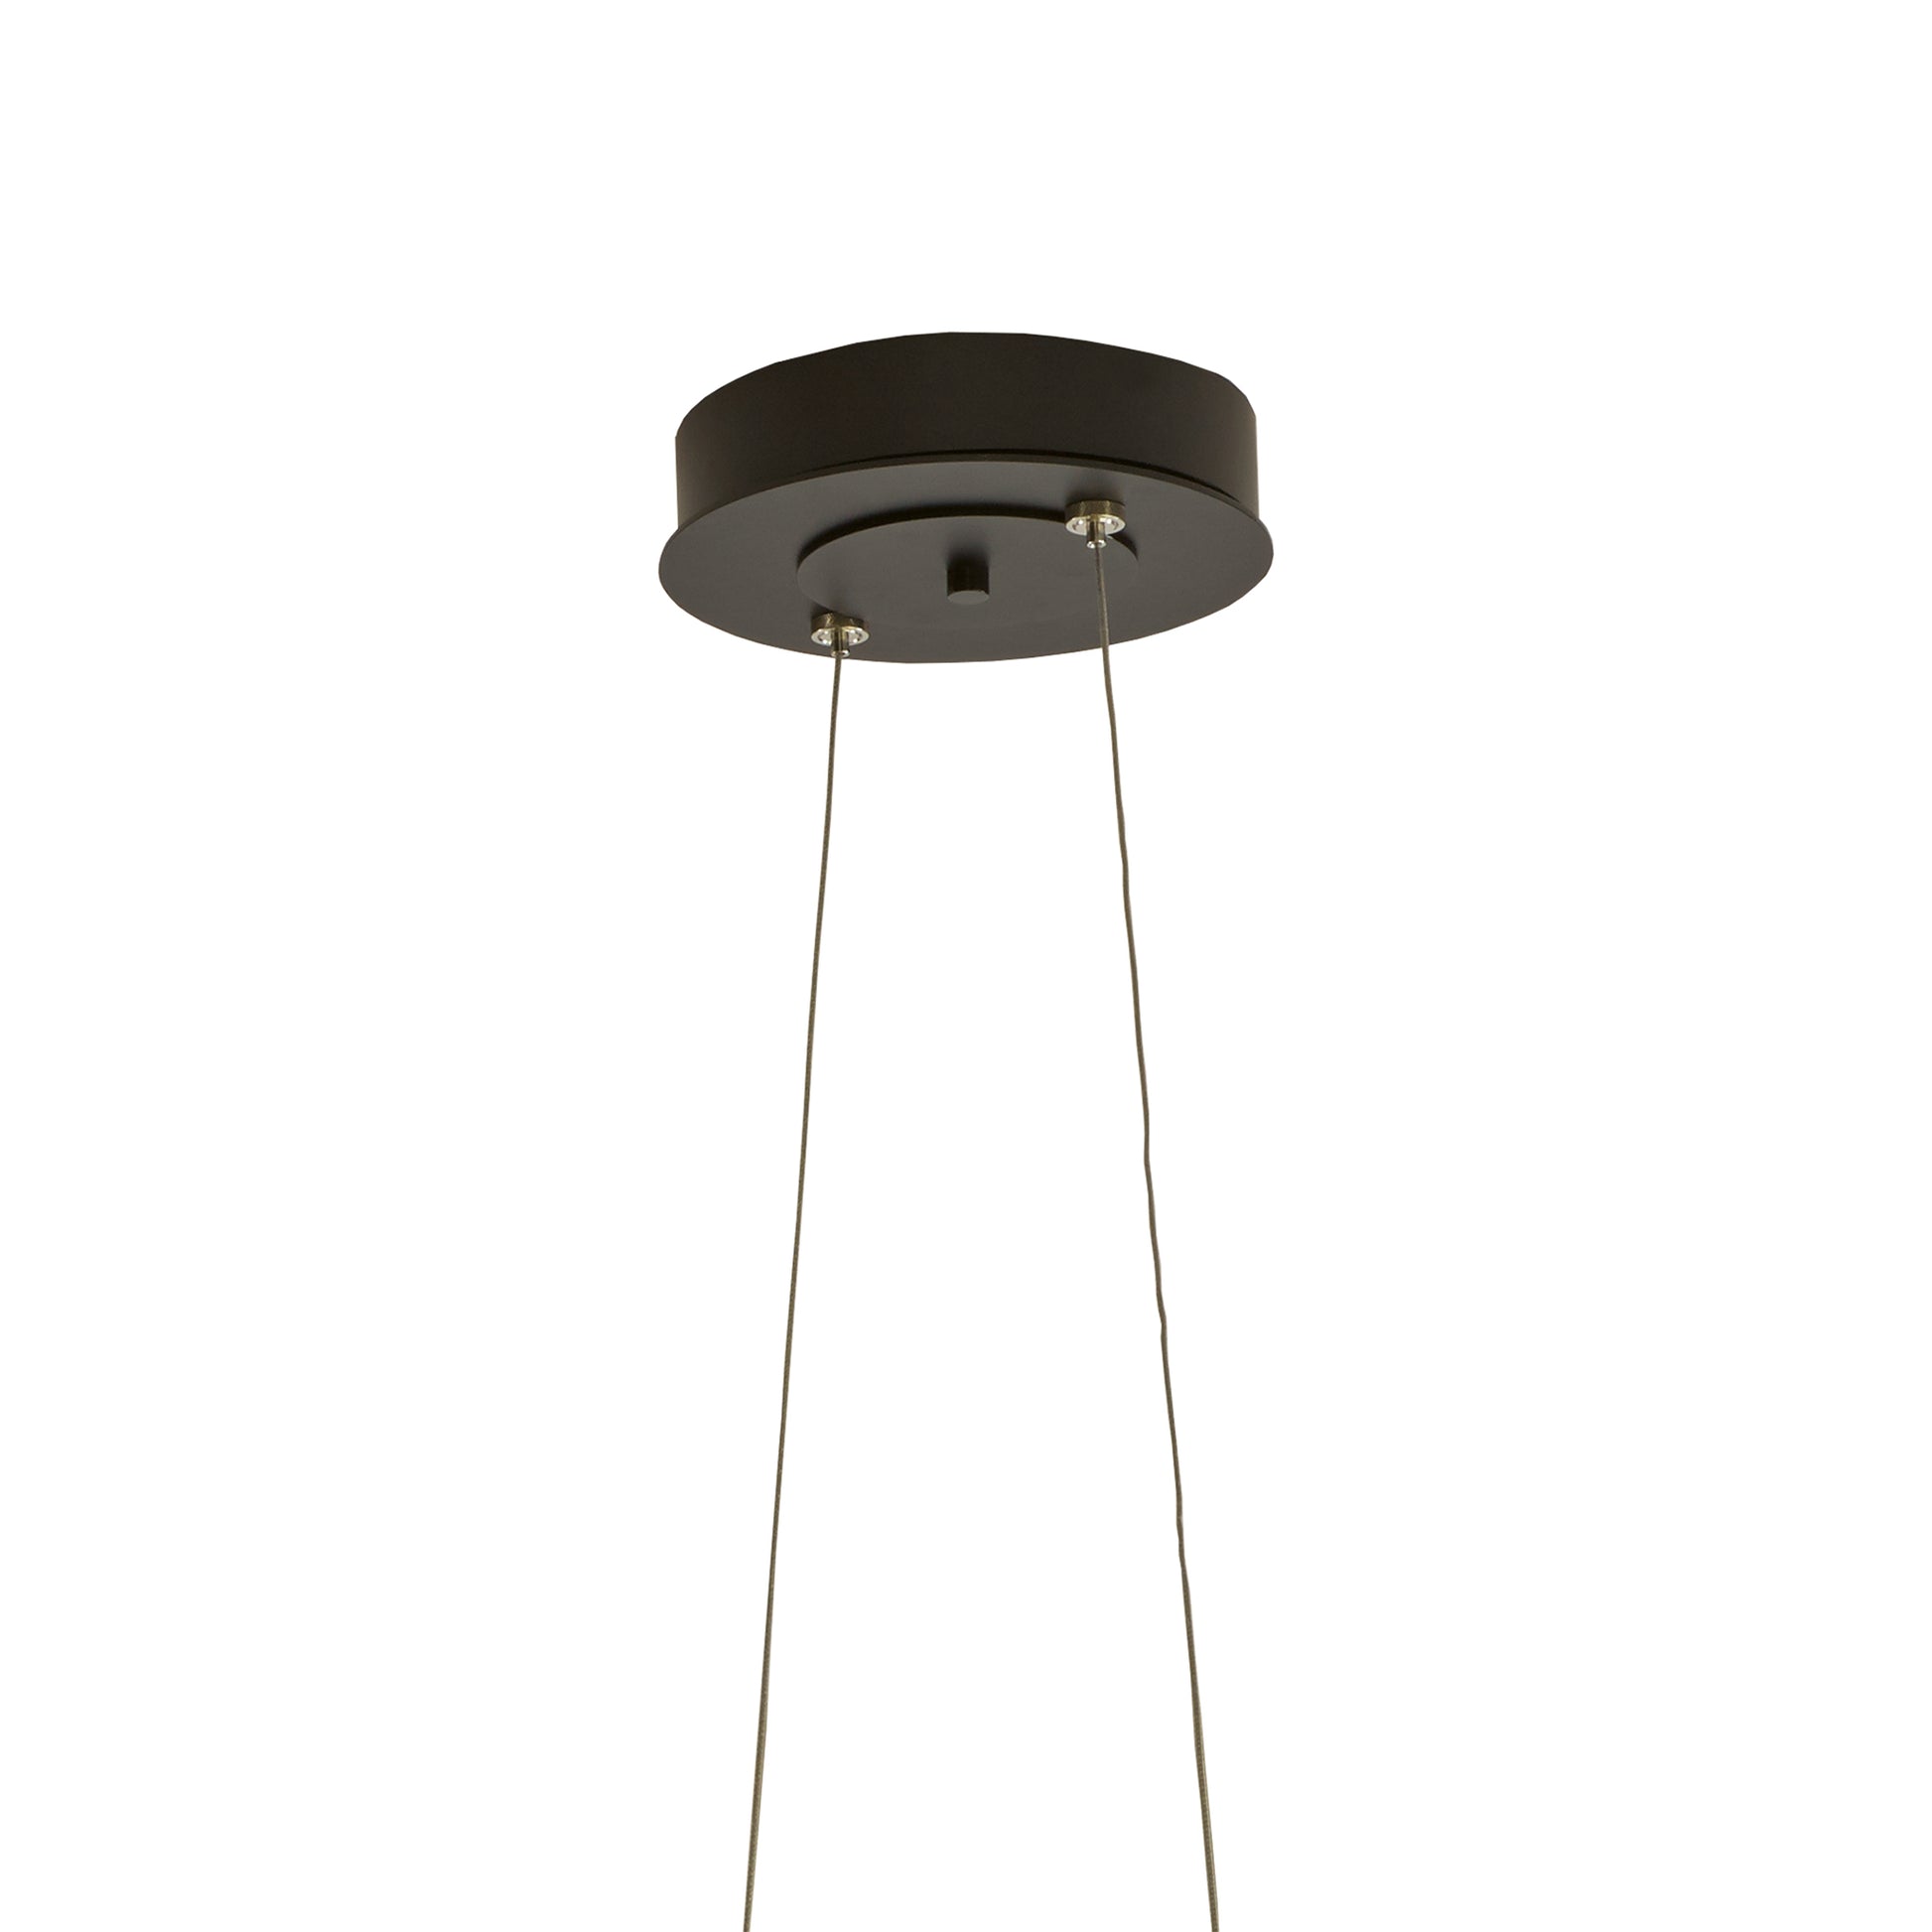 The Hubbardton Forge Celesse Pendant is a stunning piece of handcrafted lighting that adds a touch of sophistication to any space. This Hubbardton Forge Celesse Pendant, suspended delicately on a white background.